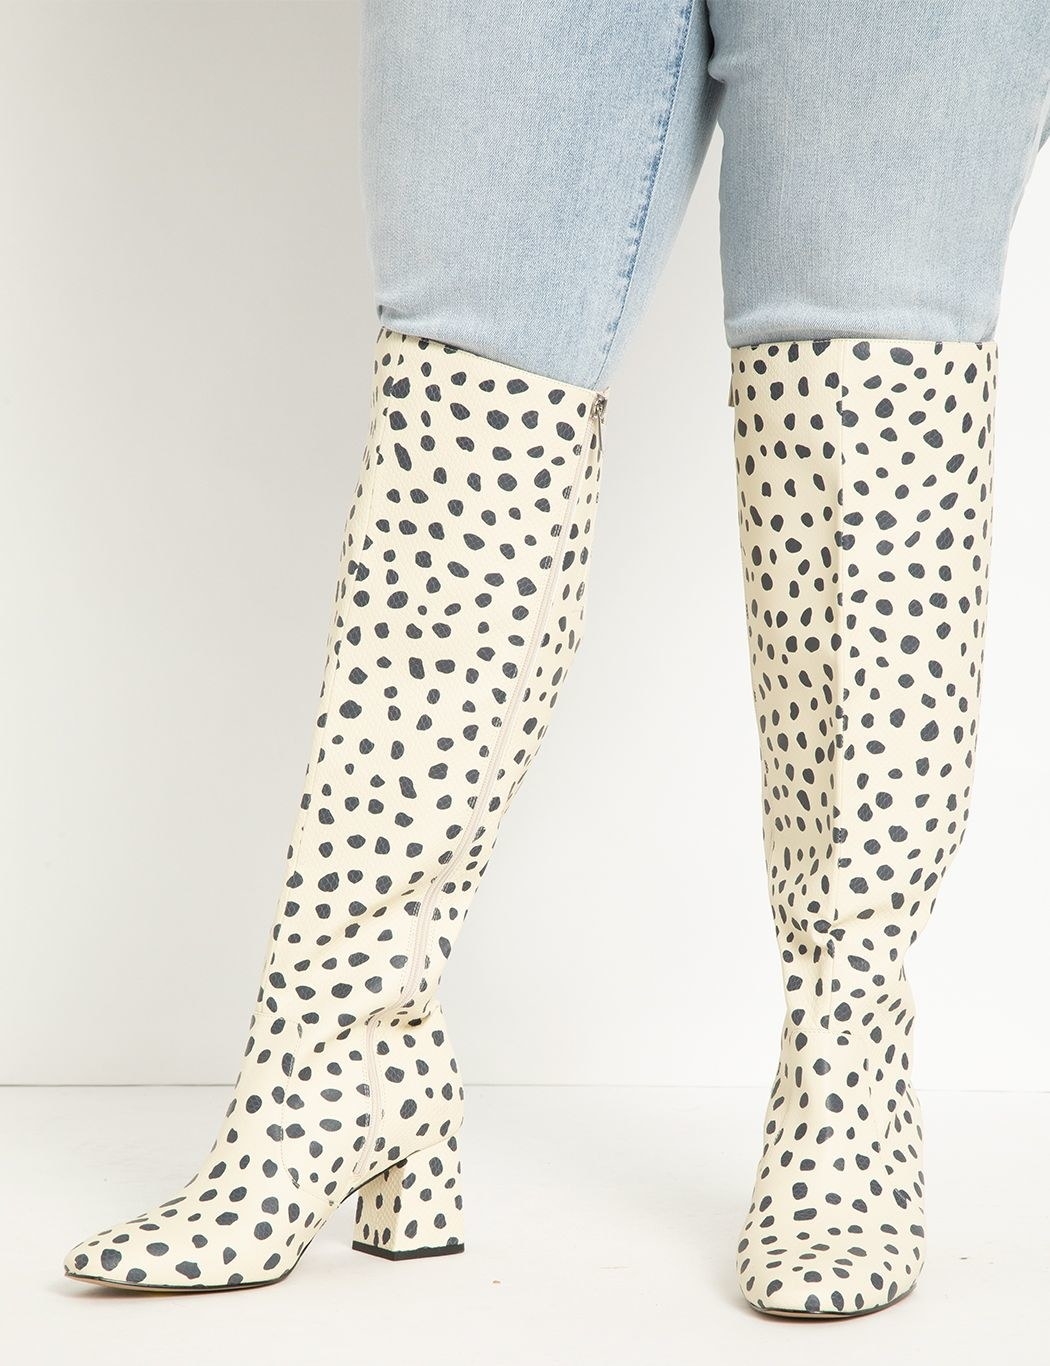 Model wearing white and gray leopard spotted knee-high boots